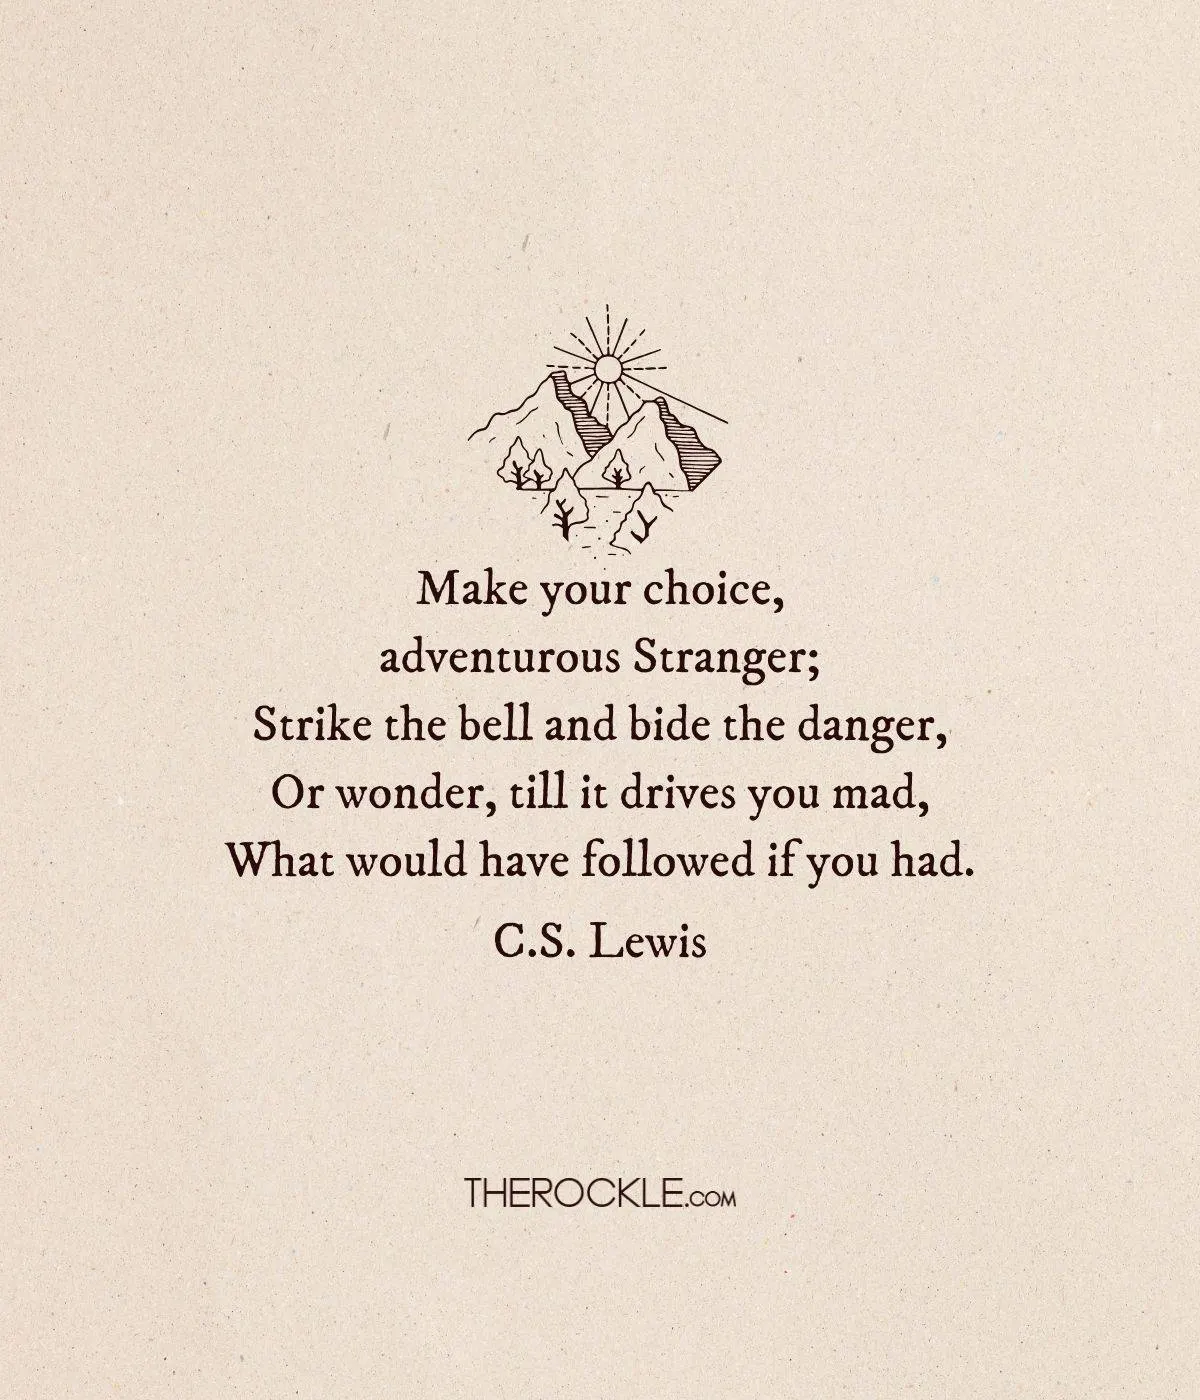 C.S. Lewis quote about risks and choices